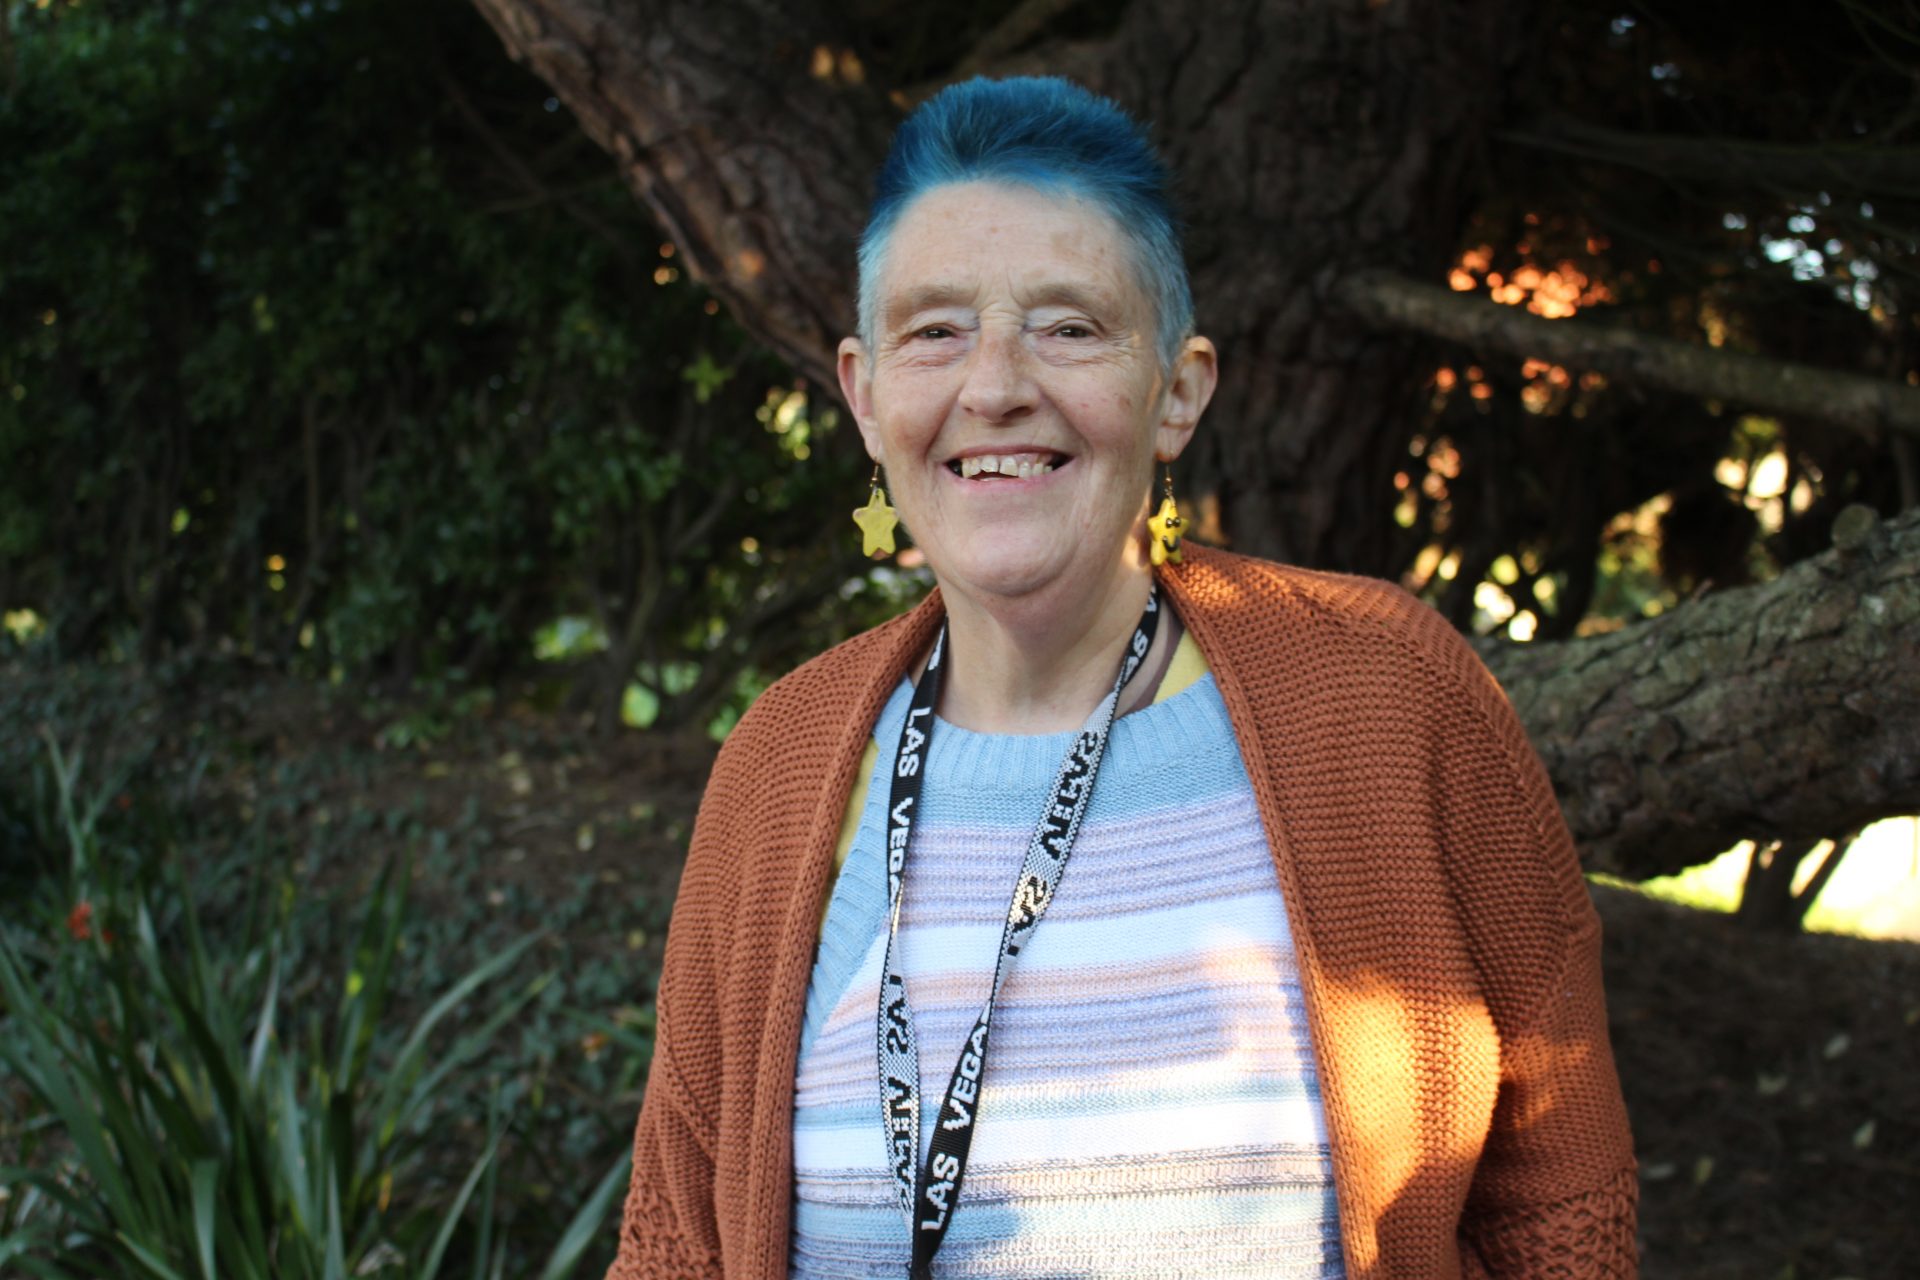 A Support Worker with short blue hair smiles at the camera. She is wearing a dark orange cardigan, stripey top, and a lanyard around her neck.